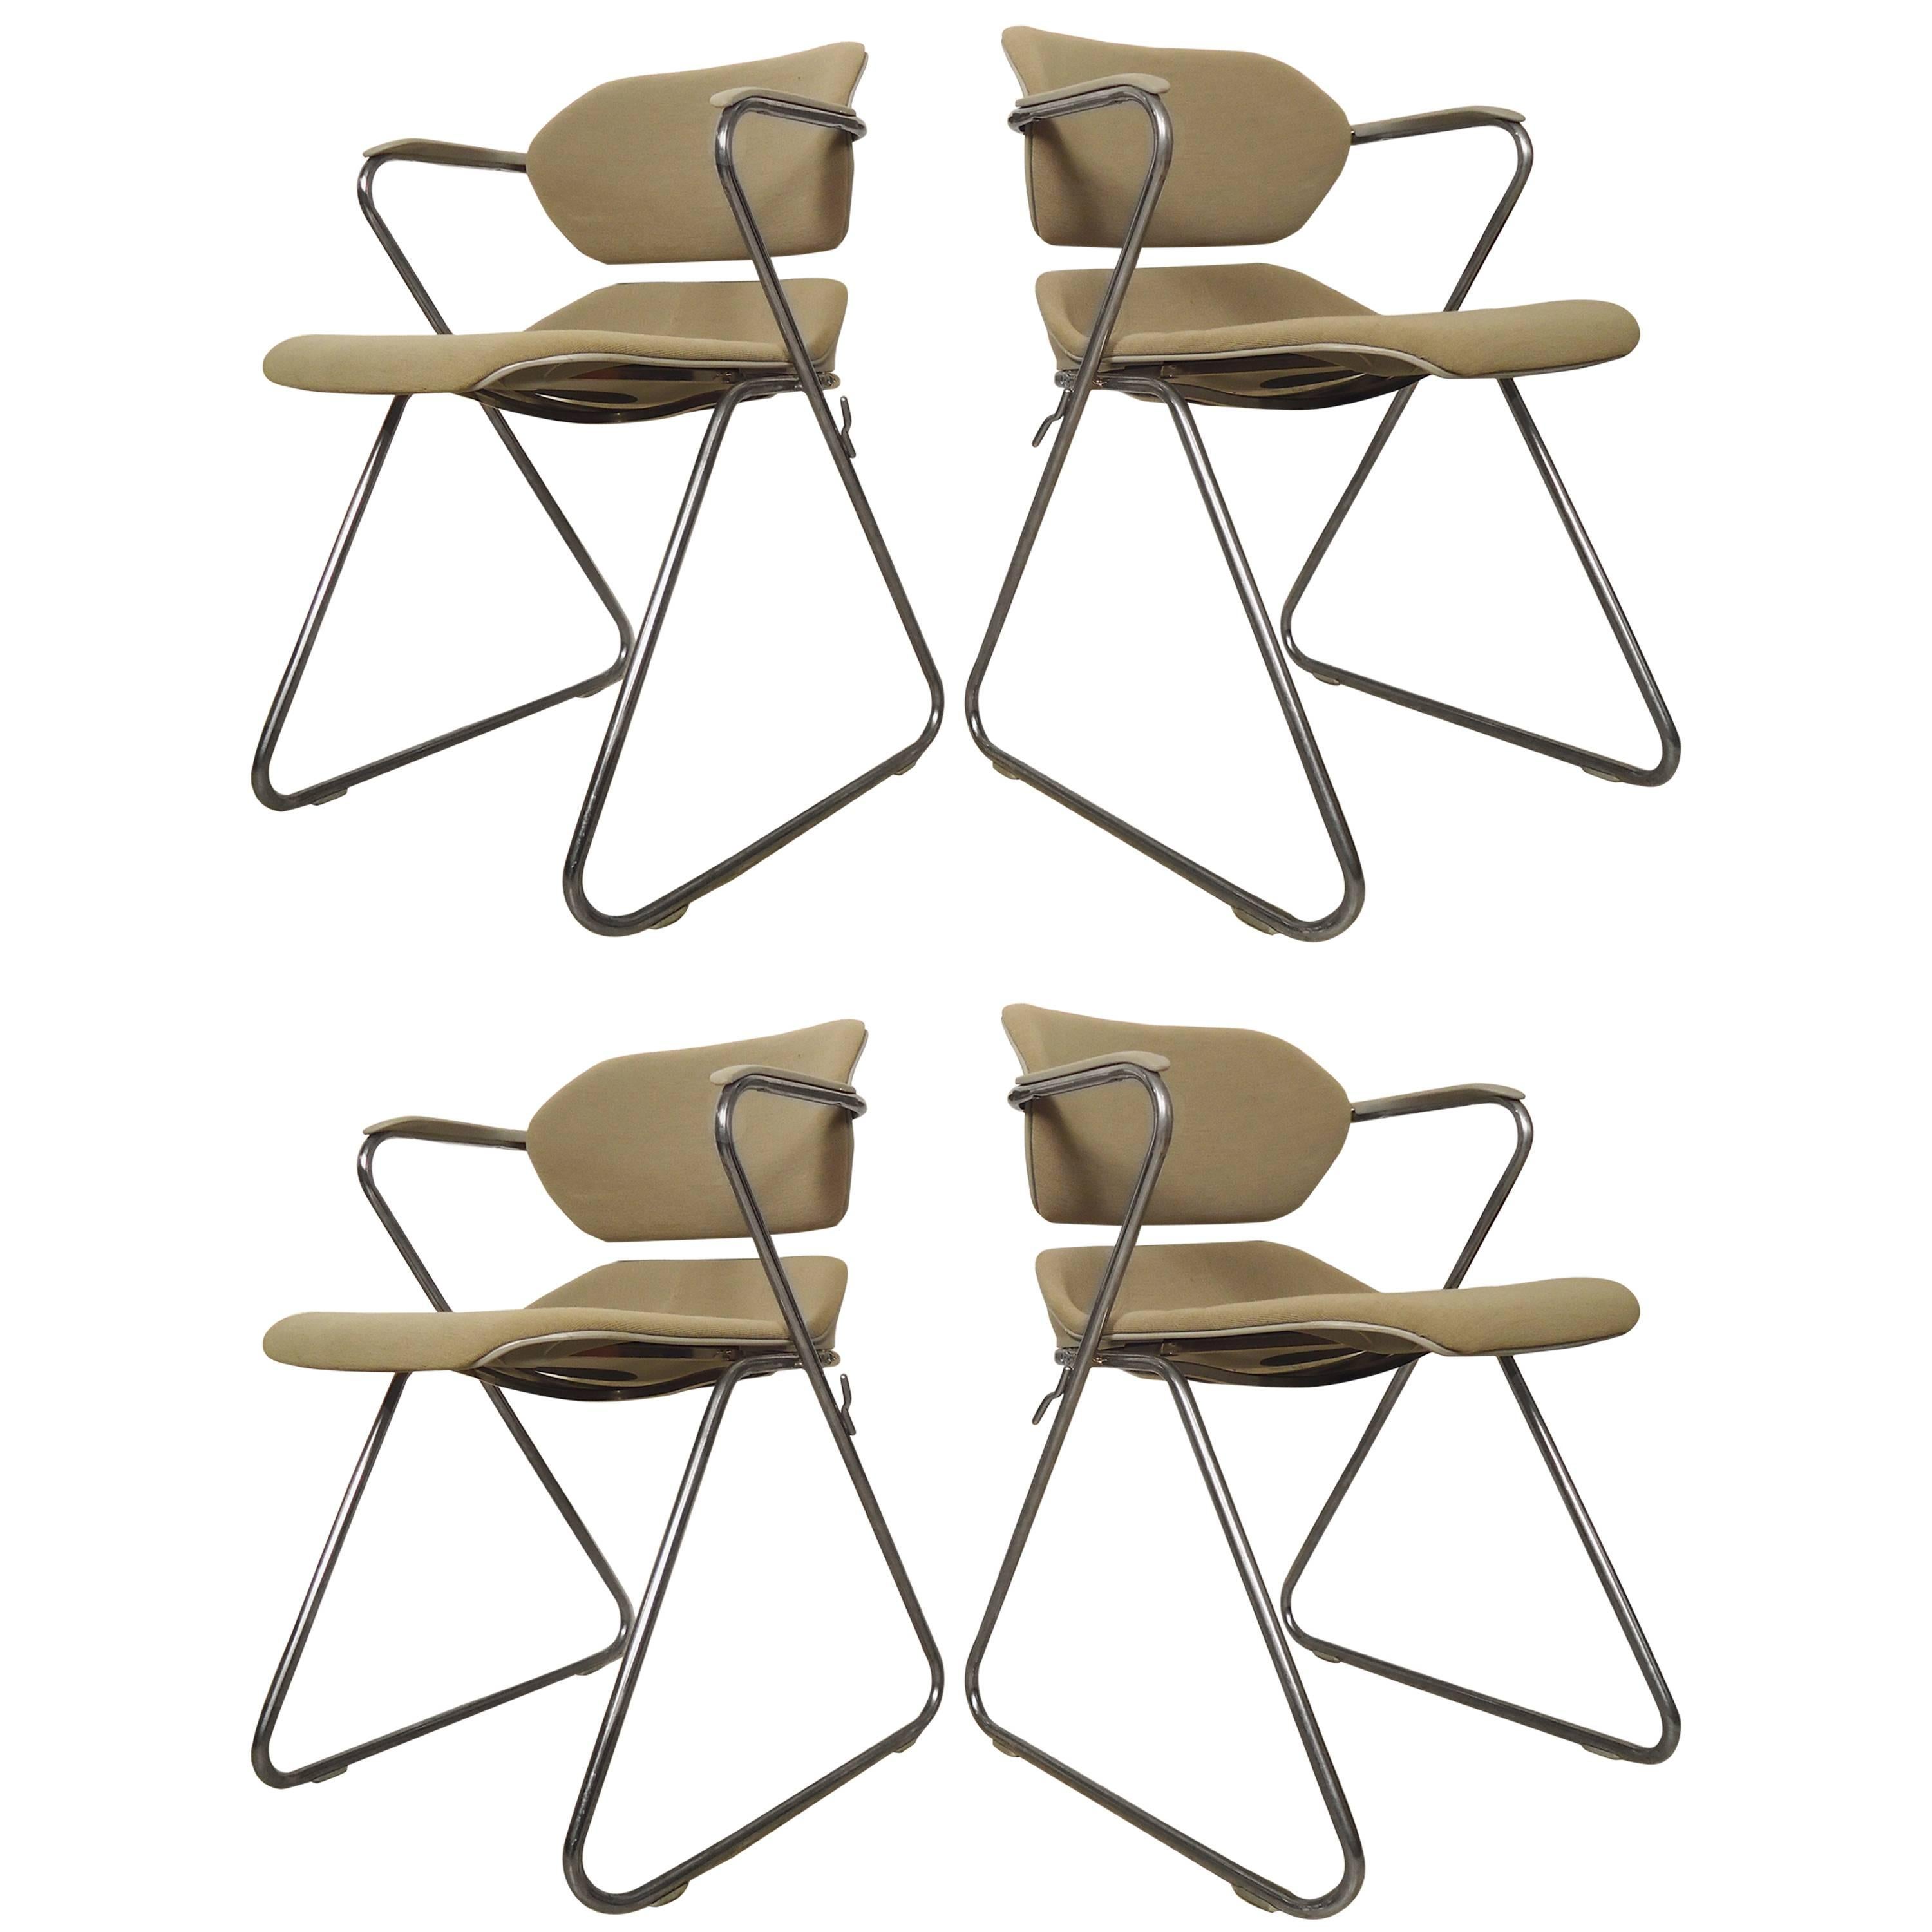 Set of Four Chrome Chairs Designed by Hugh Acton for American Seating